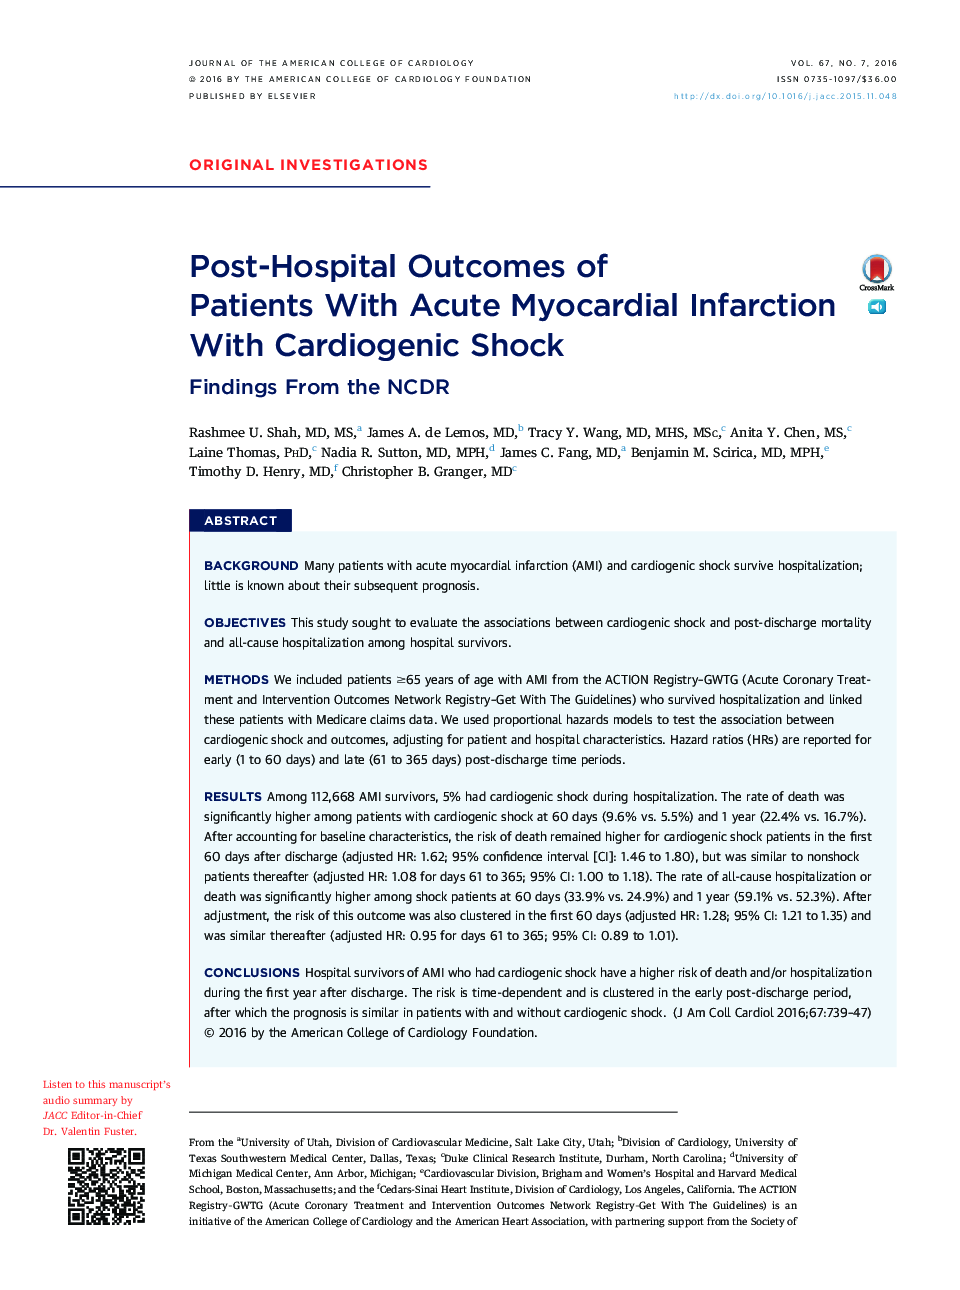 Post-Hospital Outcomes of PatientsÂ WithÂ Acute Myocardial Infarction WithÂ Cardiogenic Shock: Findings From the NCDR